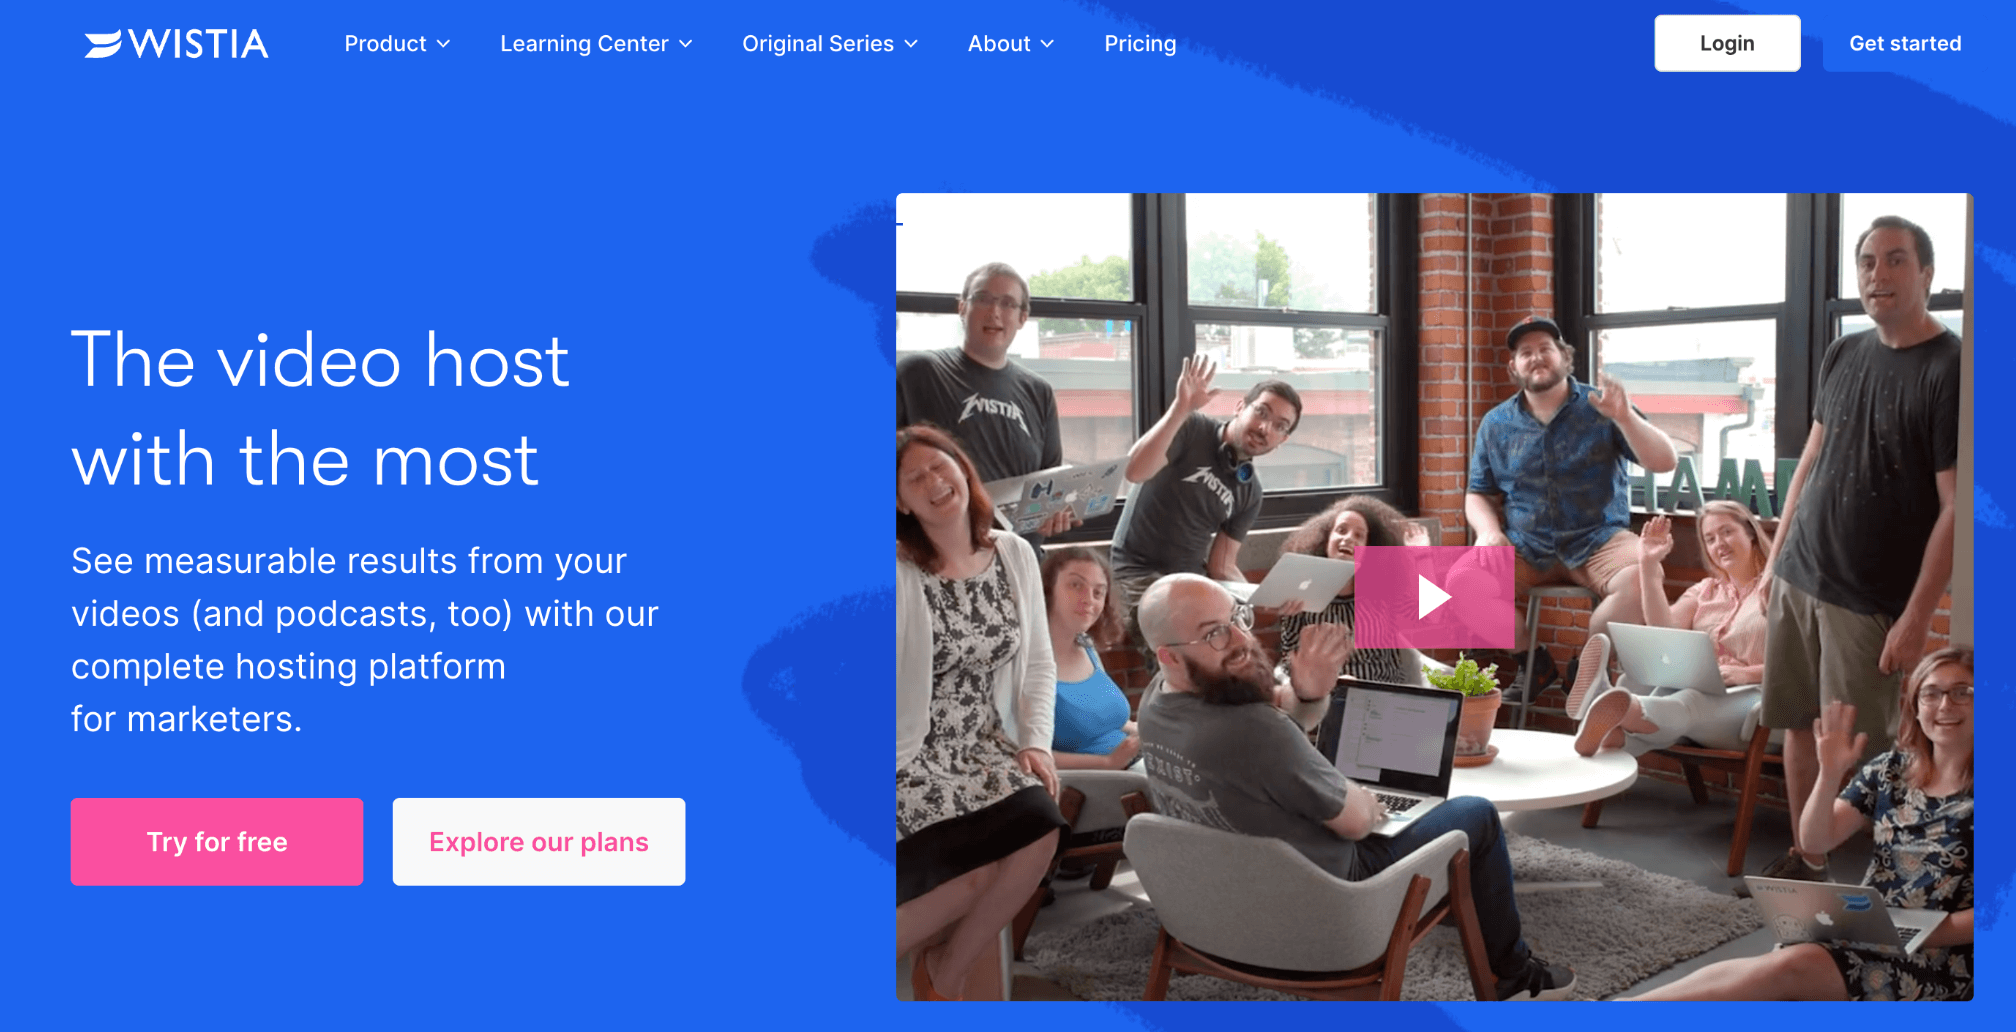 Wistia homepage: The video host with the most